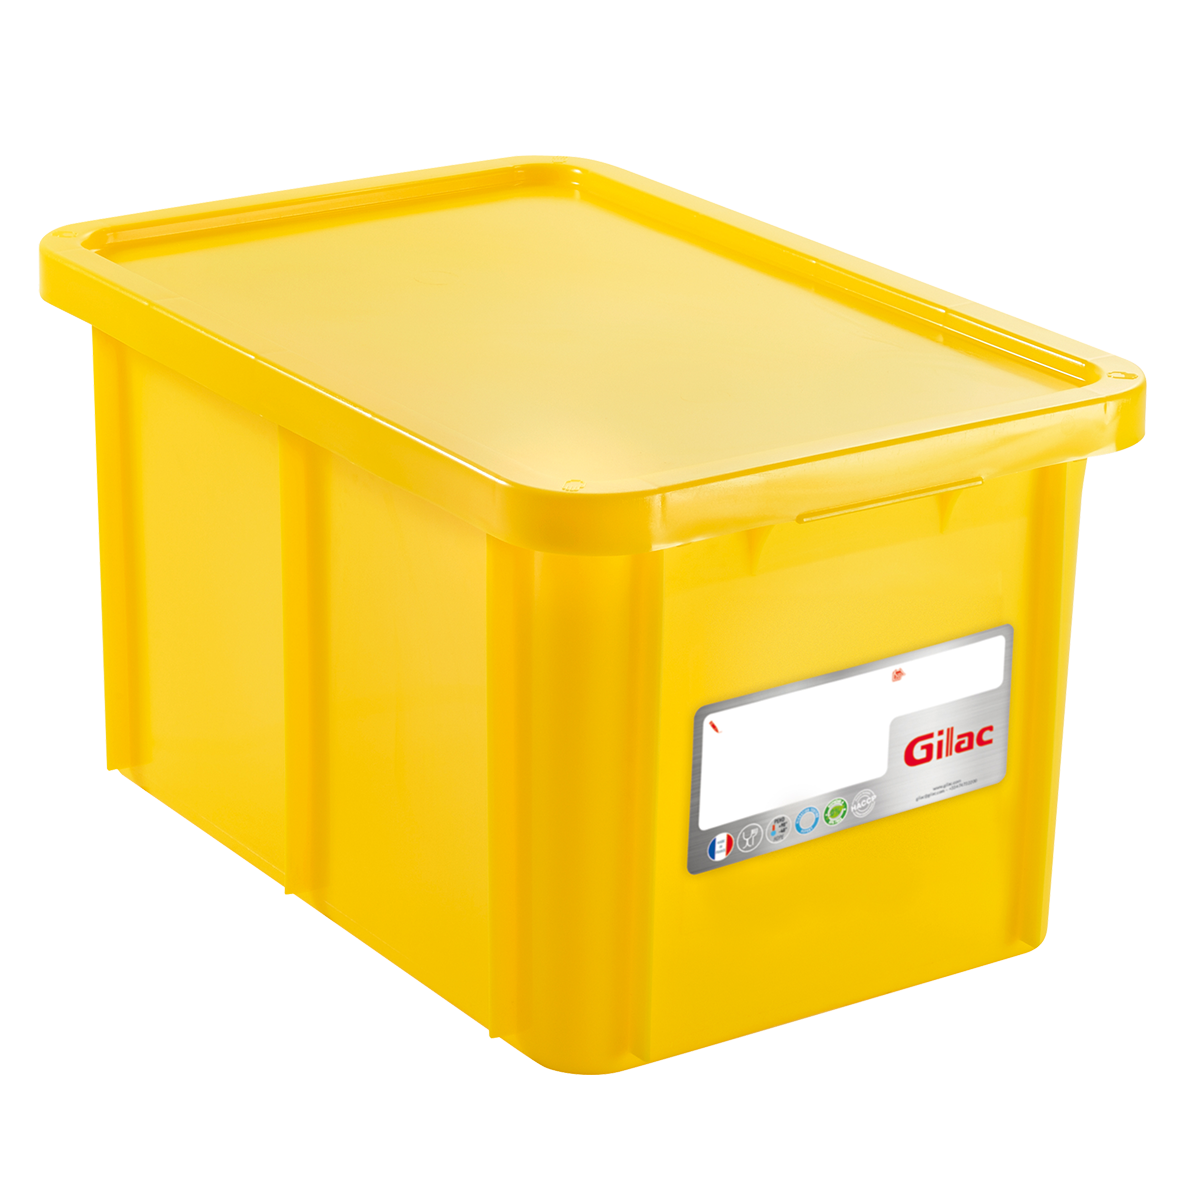 RECTANGULAR CONTAINER WITH LID, COLOR: YELLOW, CAPACITY: 55L - Mabrook Hotel Supplies